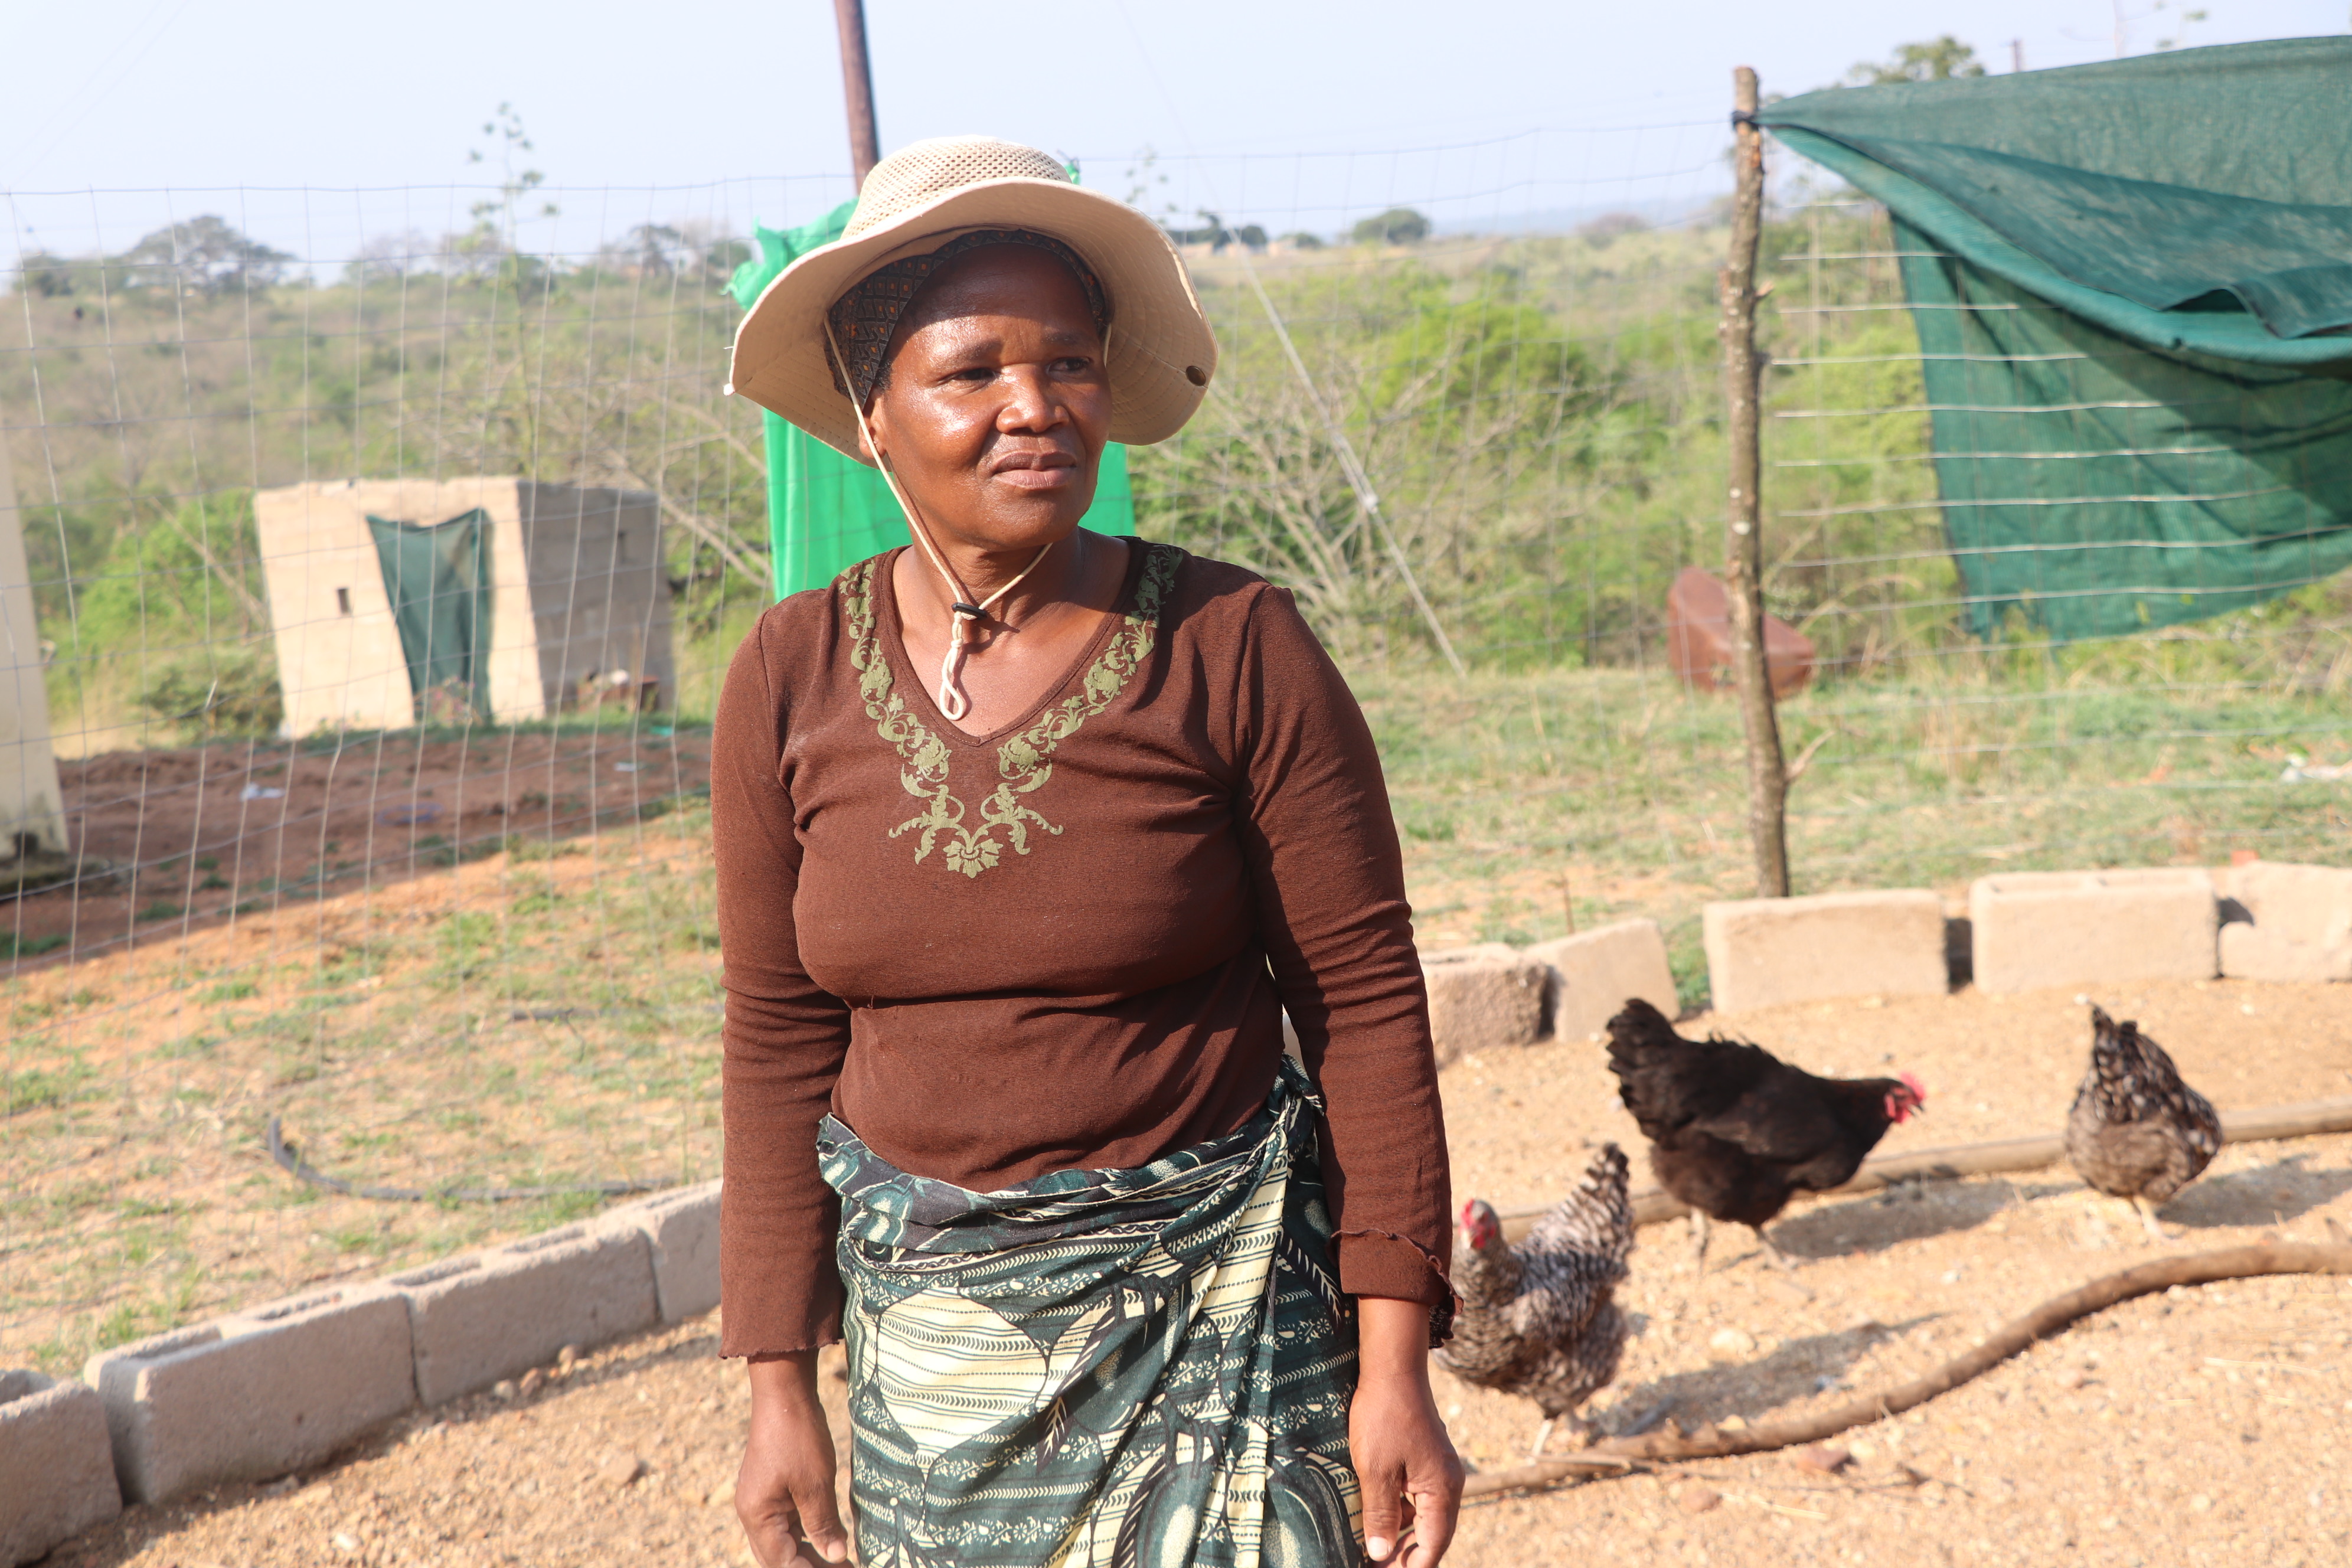 Using the income from her indigenous chickens sales, Mrs Takhona Mdluli has been able to build a new house for her family. © Gcinile Mavimbela, Eswatini Water and Agricultural Development Enterprise.